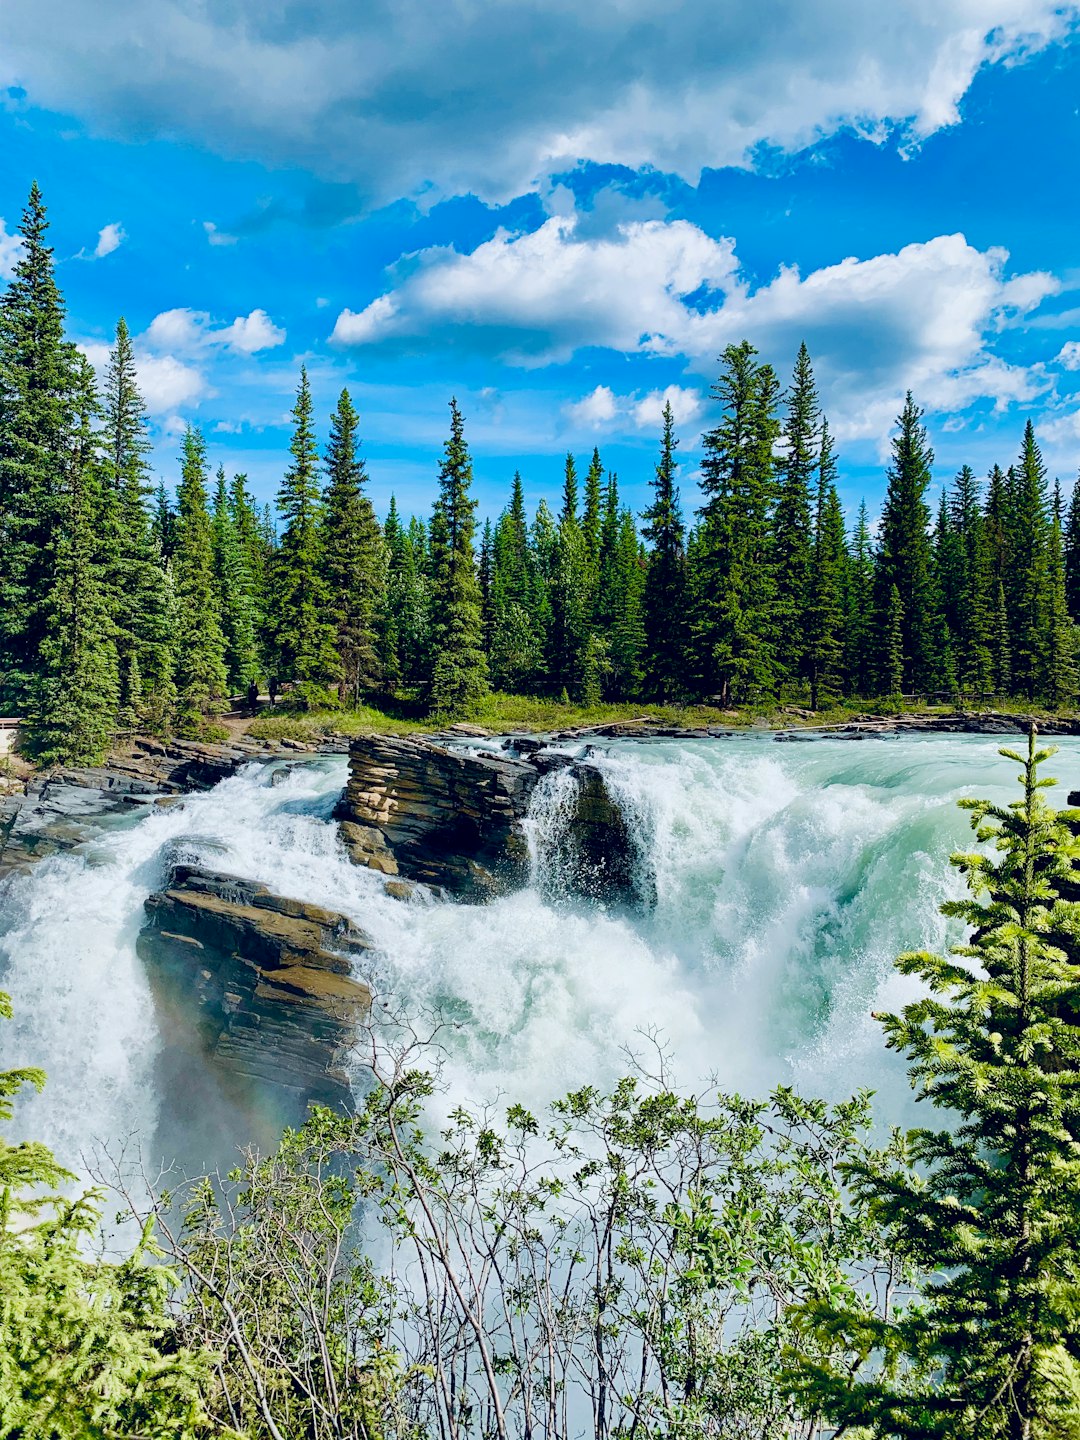 Travel Tips and Stories of Athabasca Falls in Canada